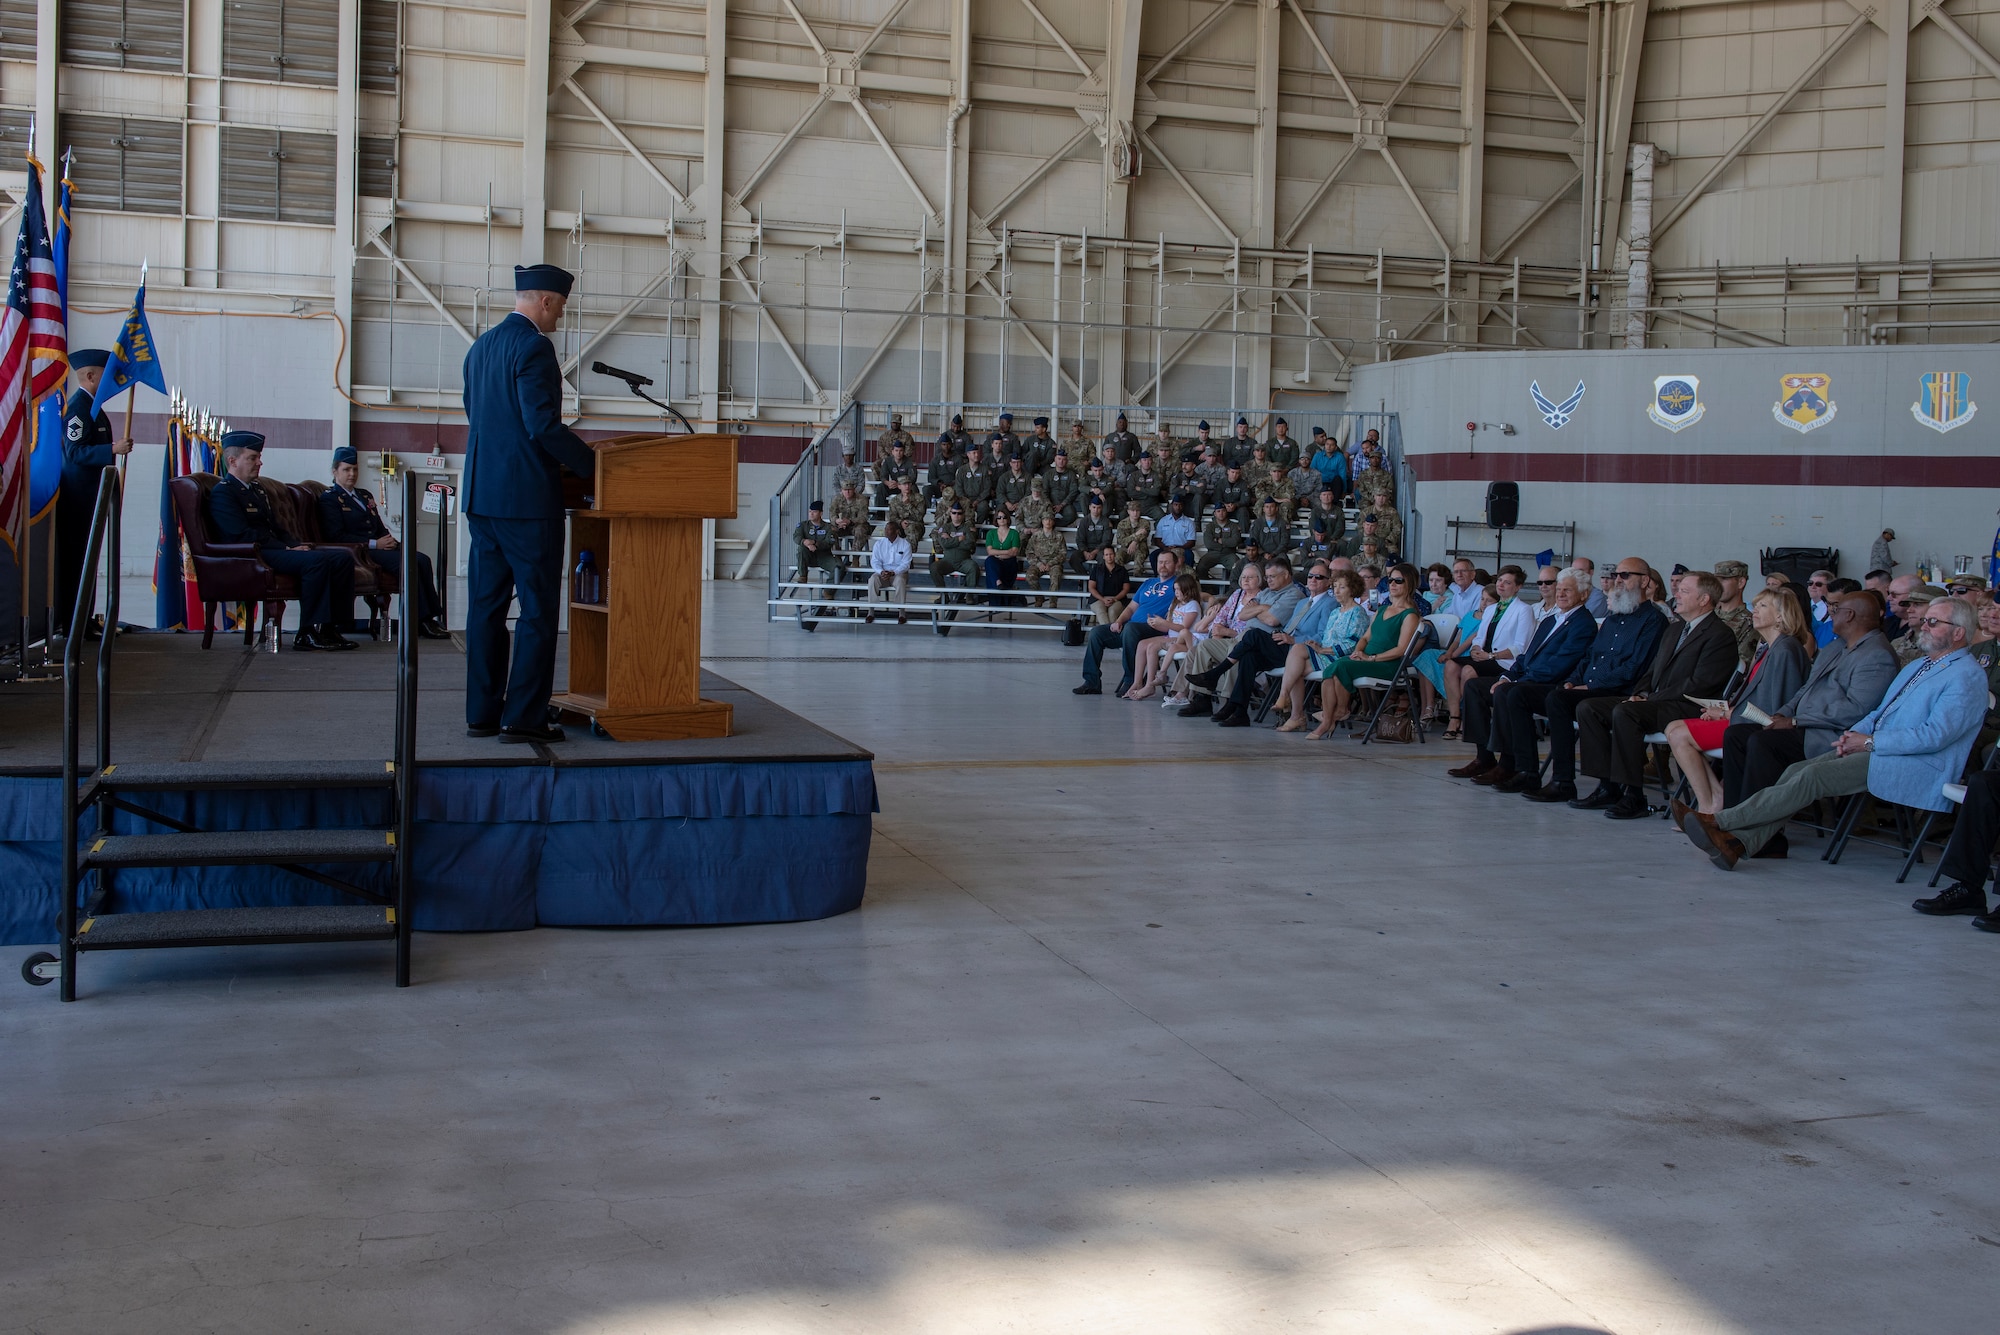 U.S. Air Force Col. Gregg Johnson, 60th Operations Group commander, delivers his first speech as commander July 26, 2019, at Travis Air Force Base, California. Col. Theresa Weems, outgoing 60th OG commander, transferred command to Johnson during a change of command ceremony. (U.S. Air Force photo by Tech. Sgt. James Hodgman)